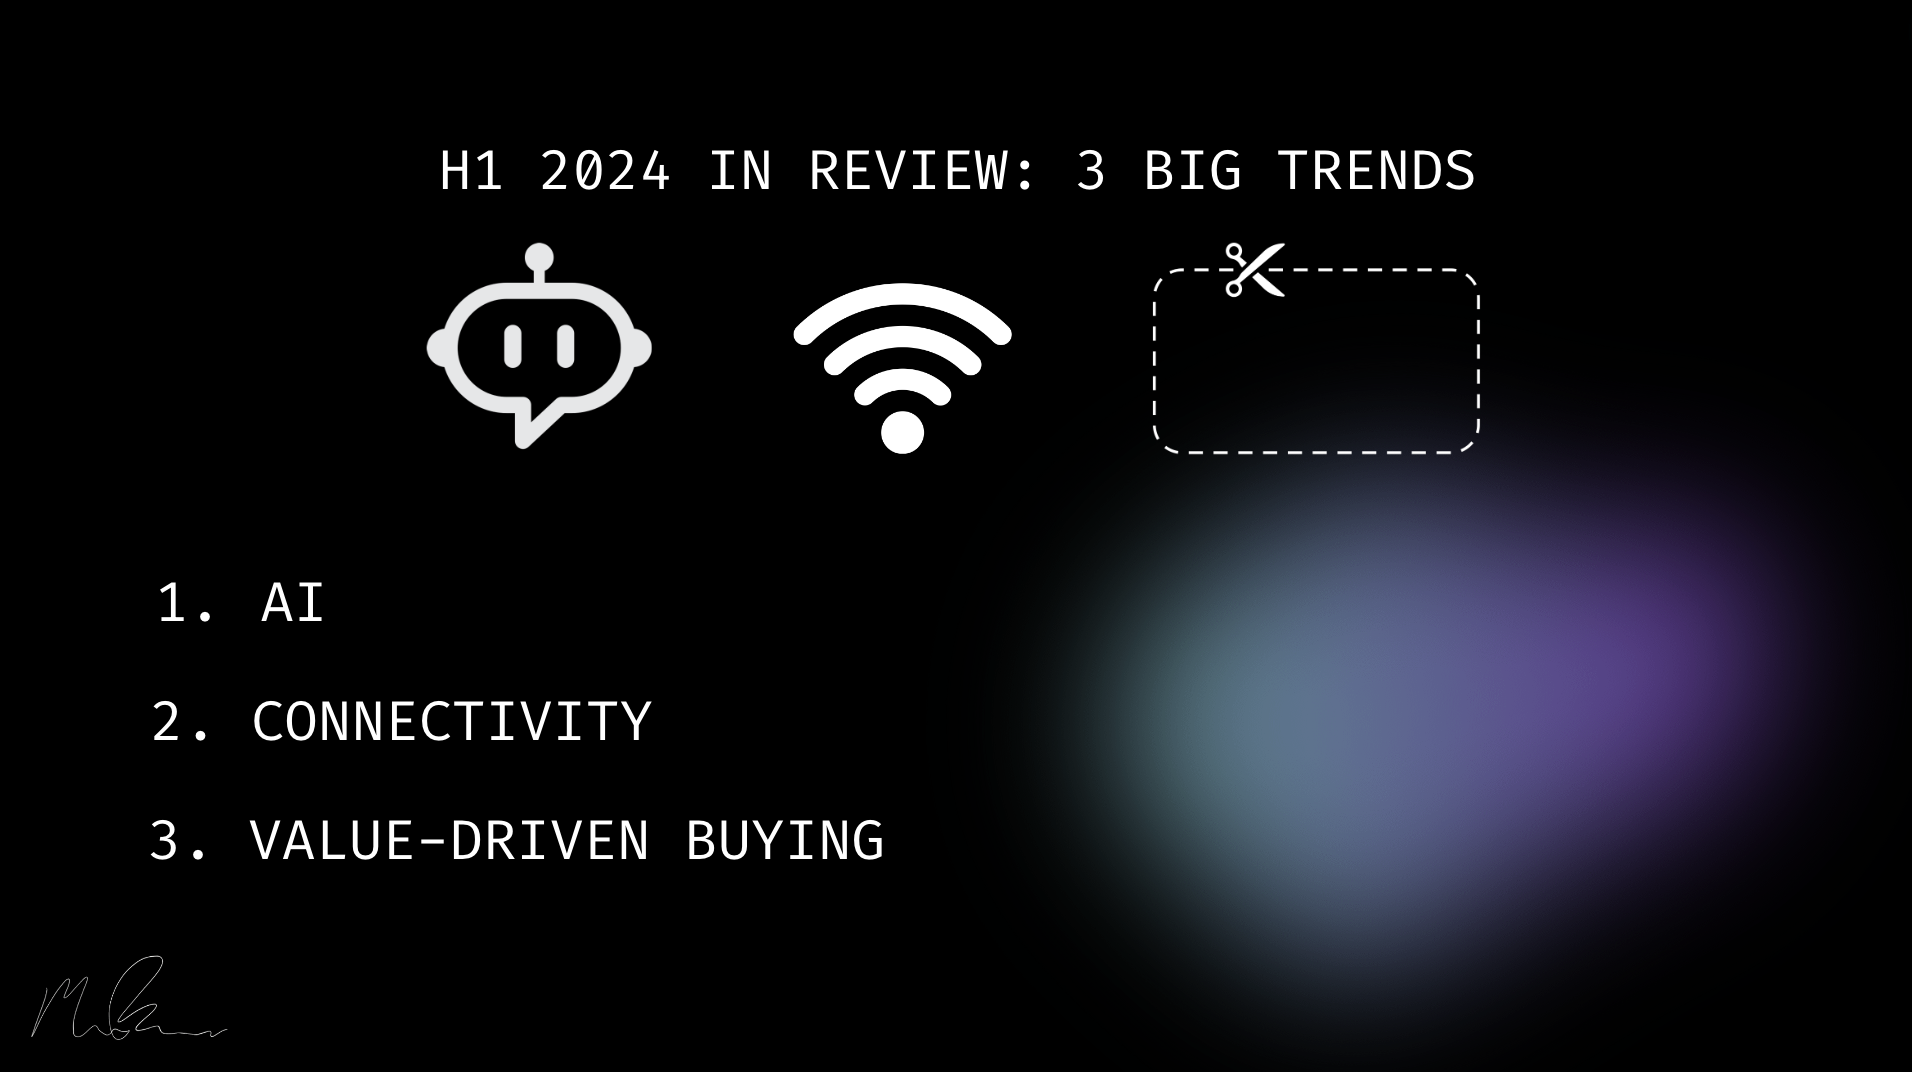 H1 2024 in Review: 3 Big Trends